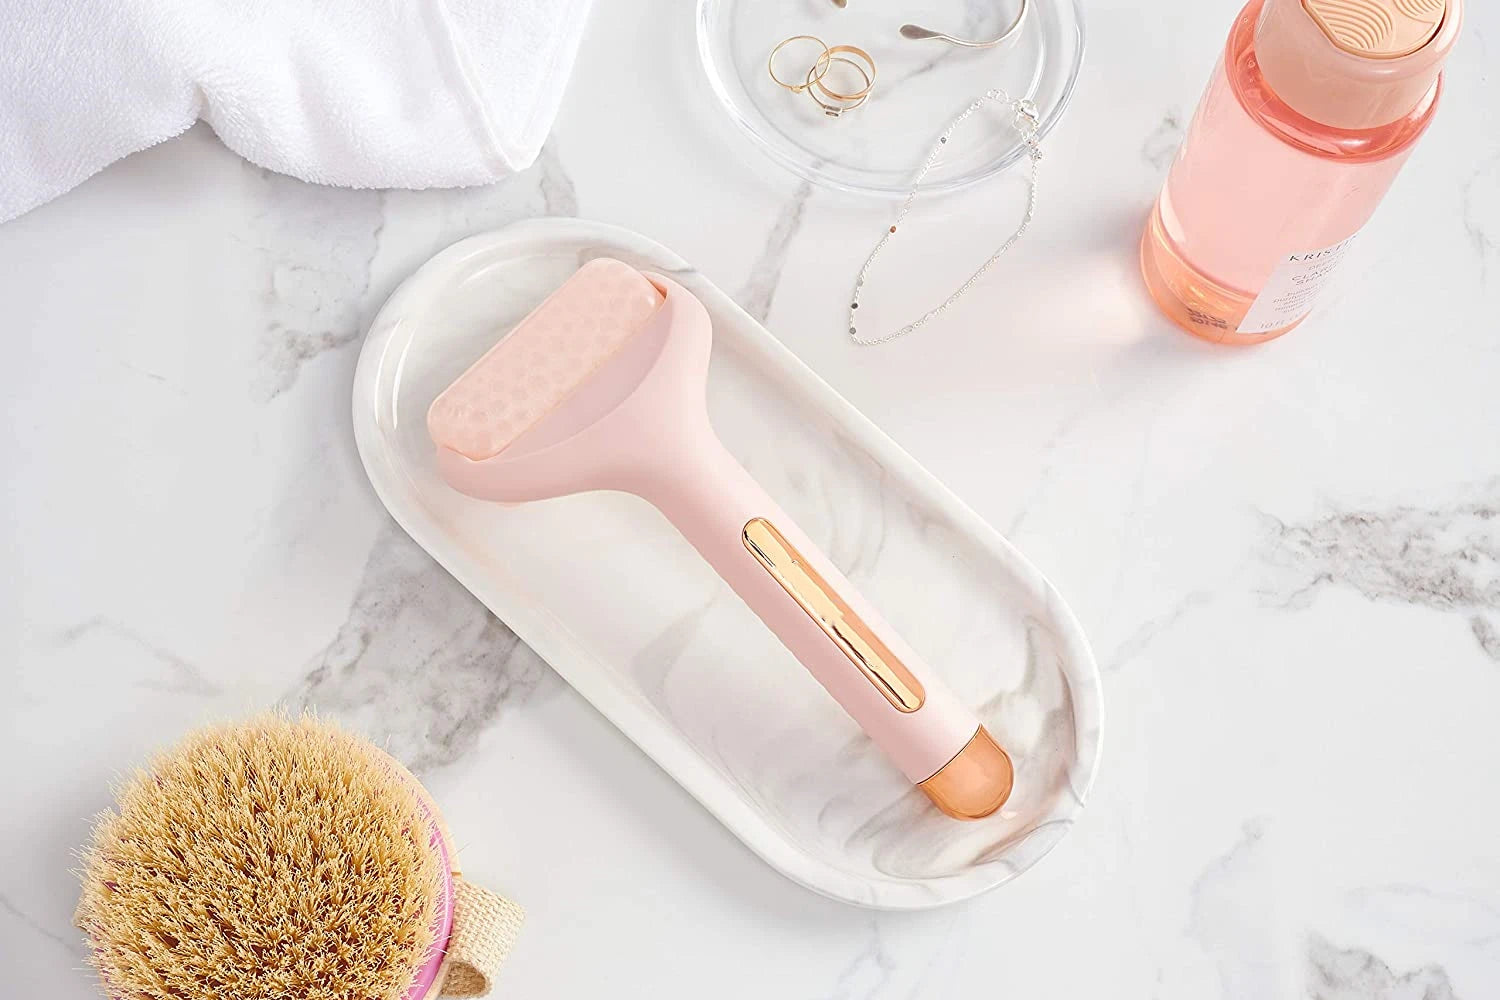 Pink Ice Roller,Face Roller Massager for Puffiness Relief Pain and Minor Injury,Beauty Products to Tighten Pores Whiten Skin